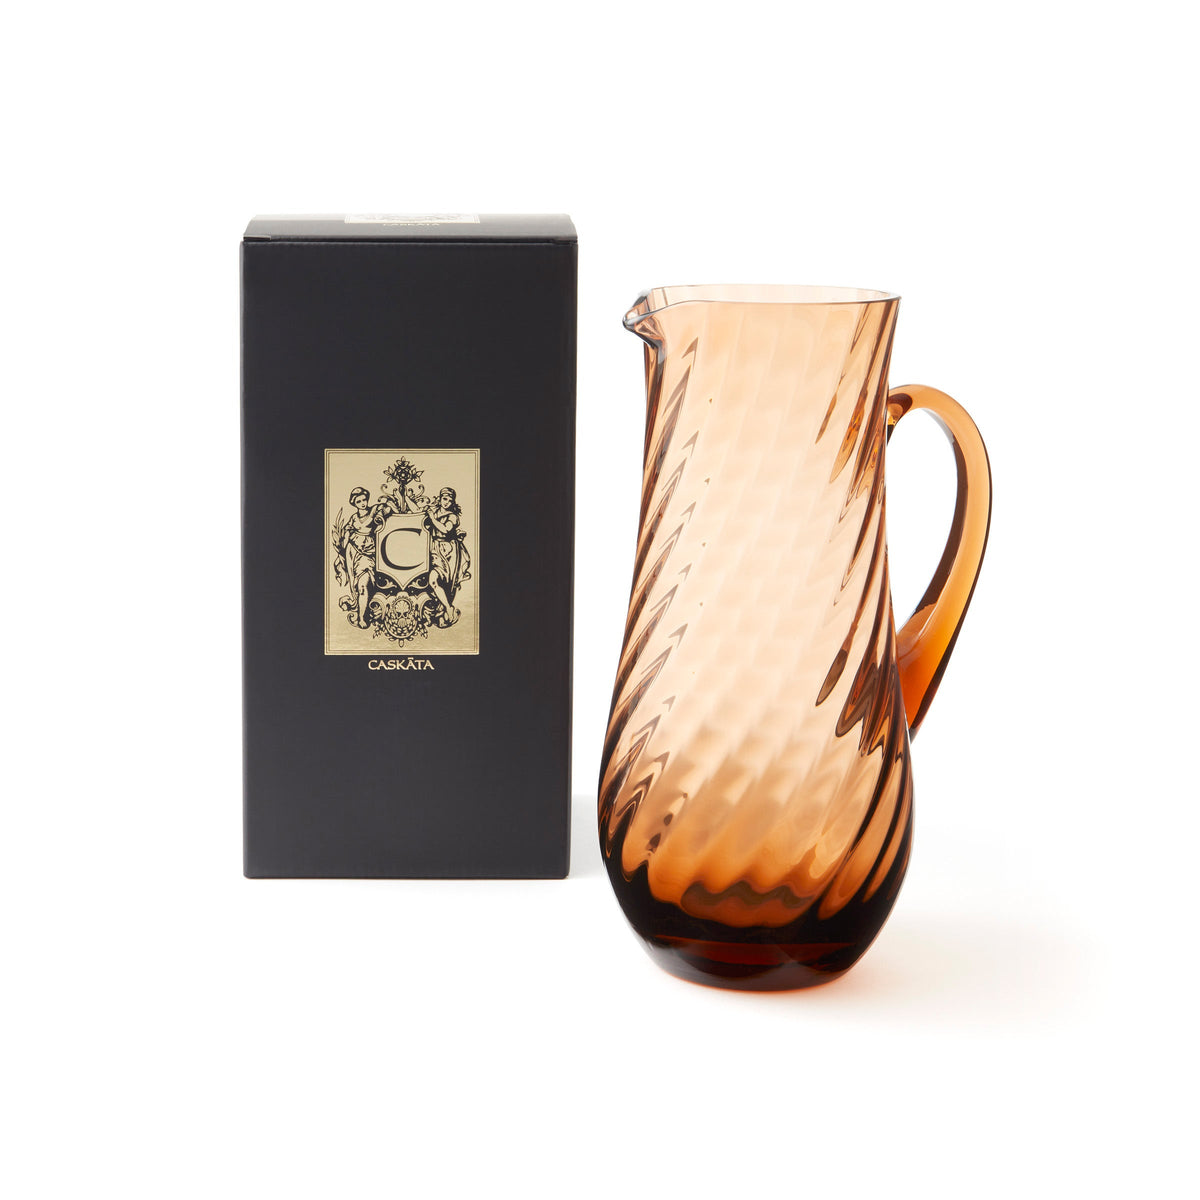 Quinn Amber Pitcher with a beautiful black and gold giftbox.